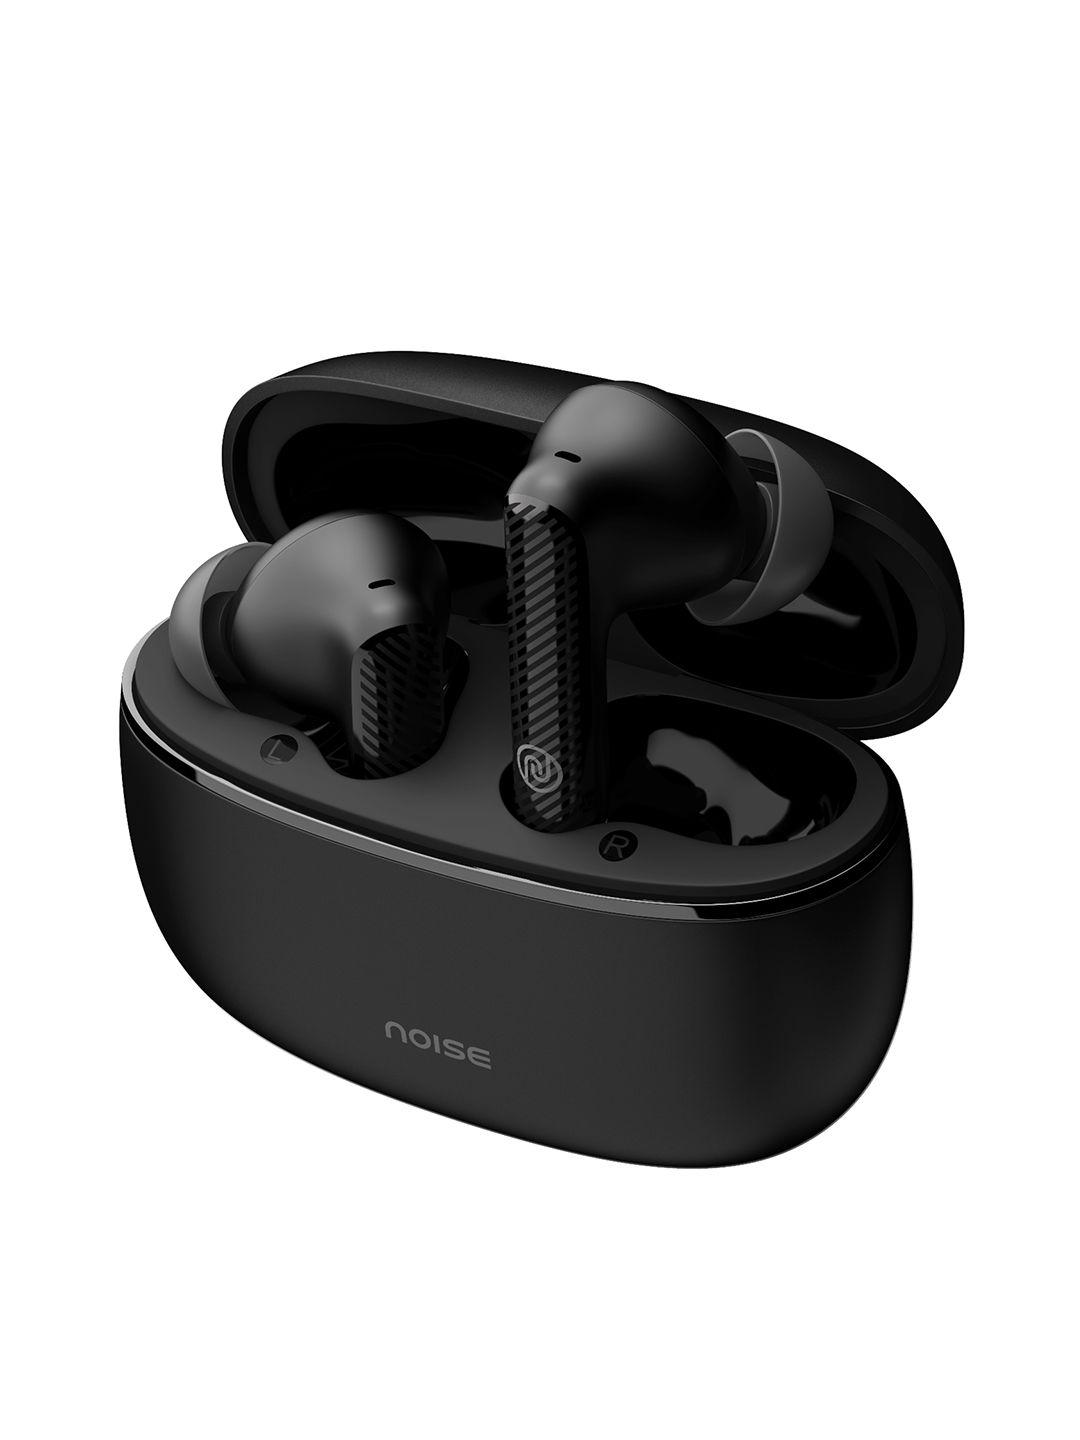 noise-aura-buds-truly-wireless-earbuds-with-60h-playtime-and-quad-mic-enc---aura-black